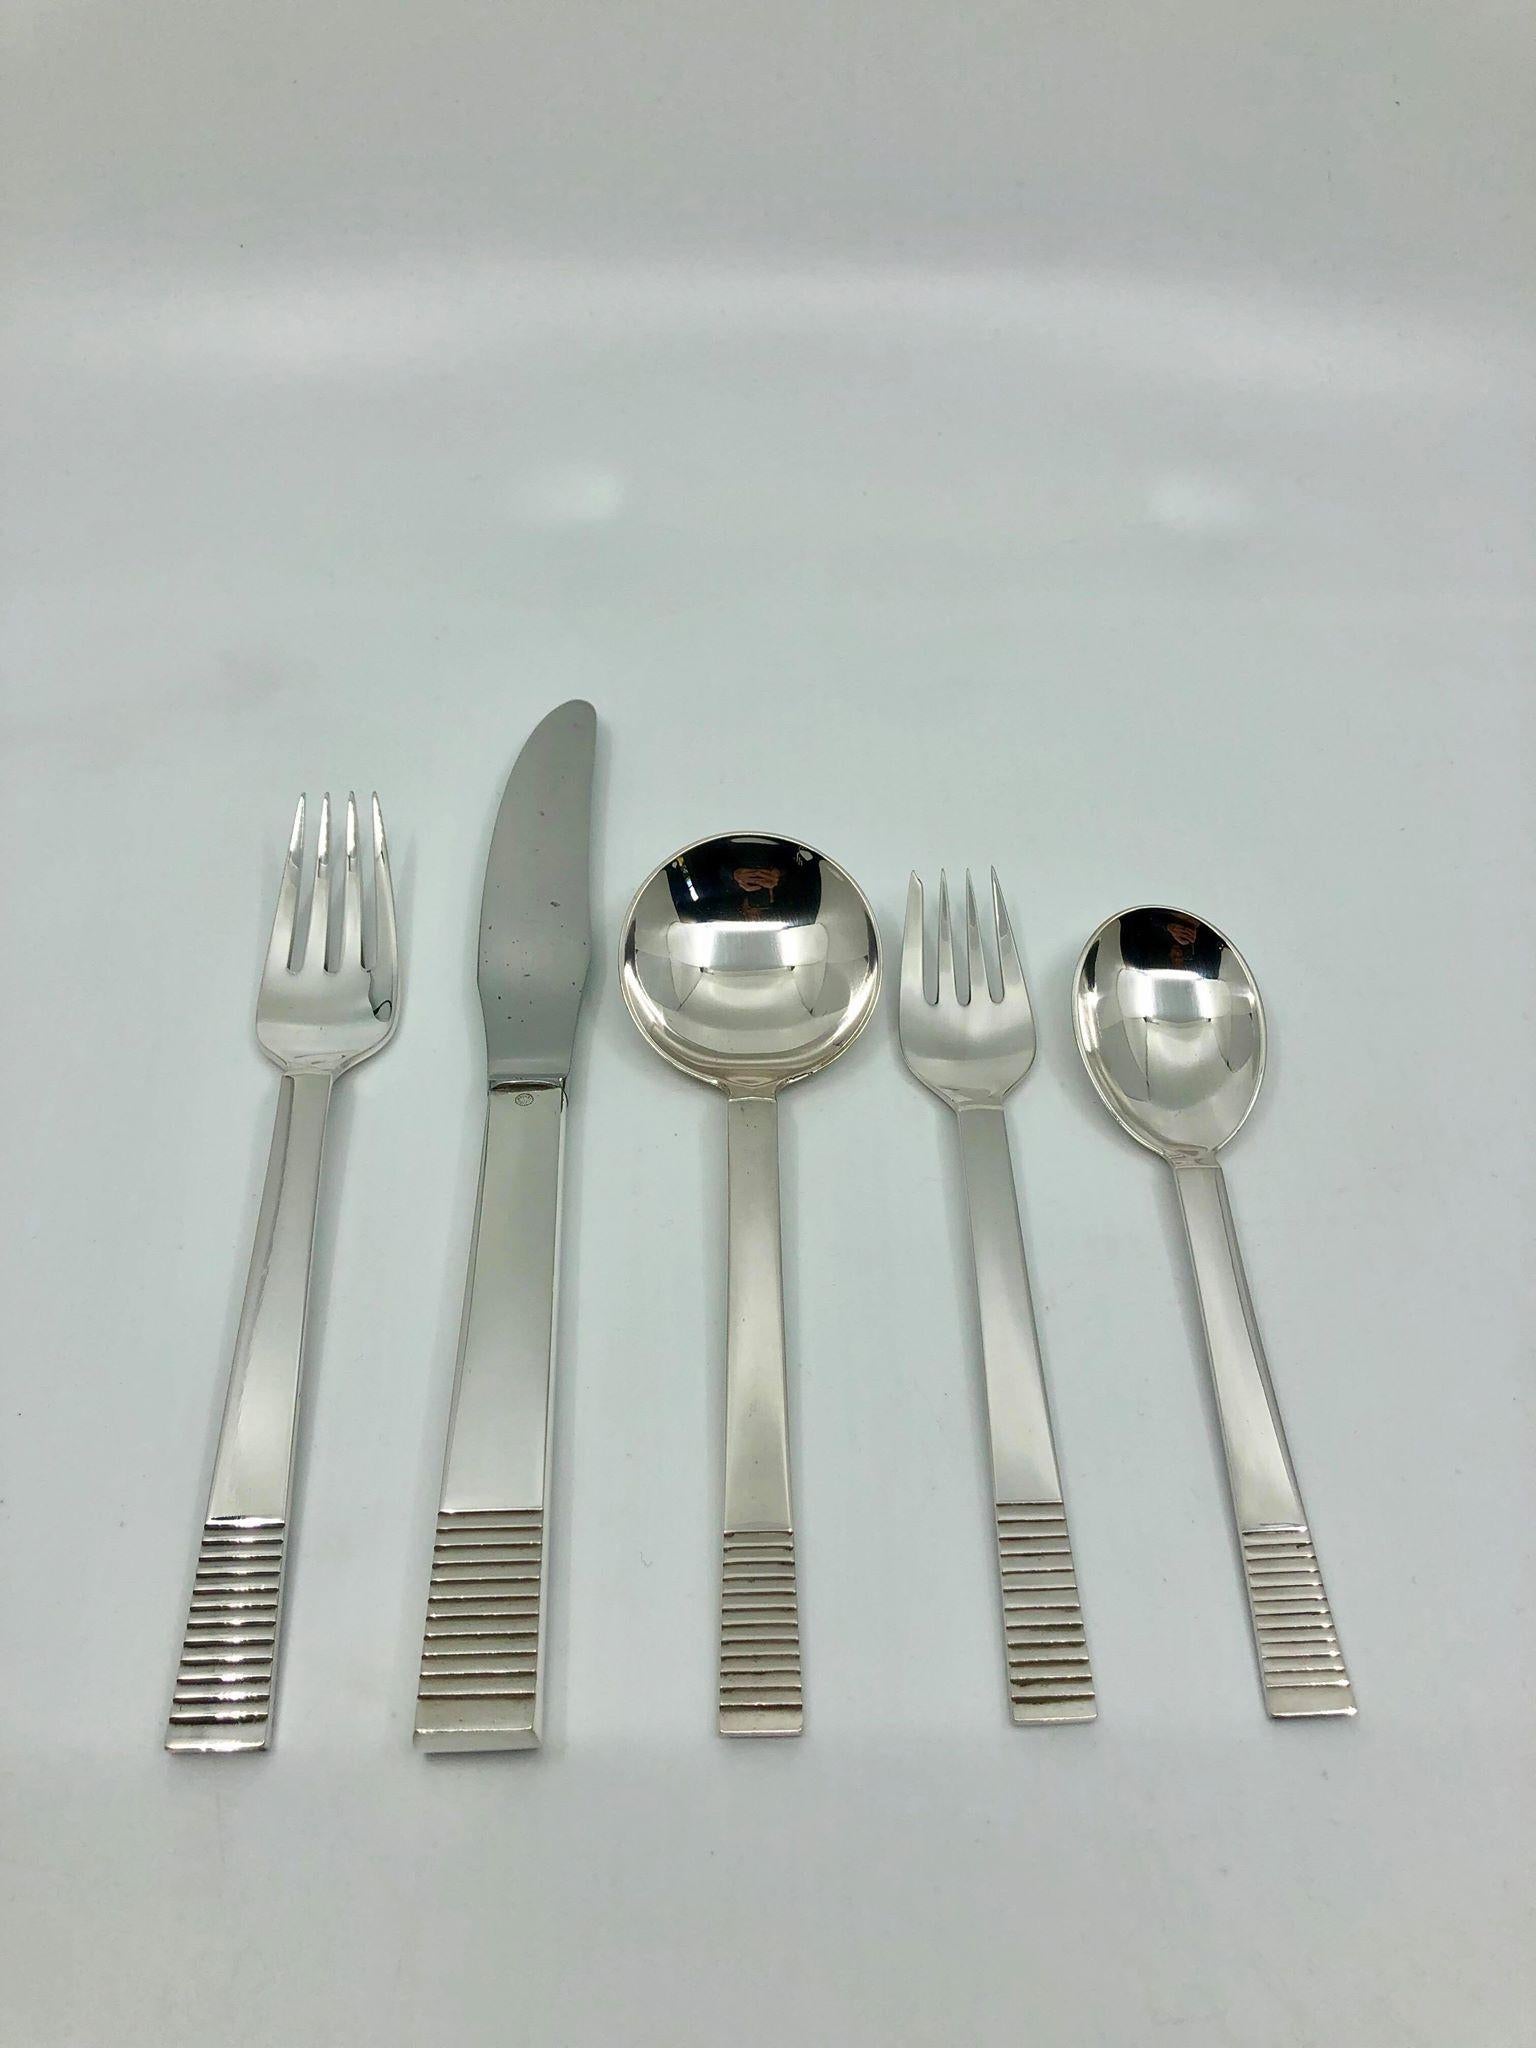 This is a sterling silver Georg Jensen Art Deco silverware service for twelve people in the parallel pattern, design #25 by Oscar Gundlach-Pedersen from 1931.

This set includes:

12 x dinner fork 7